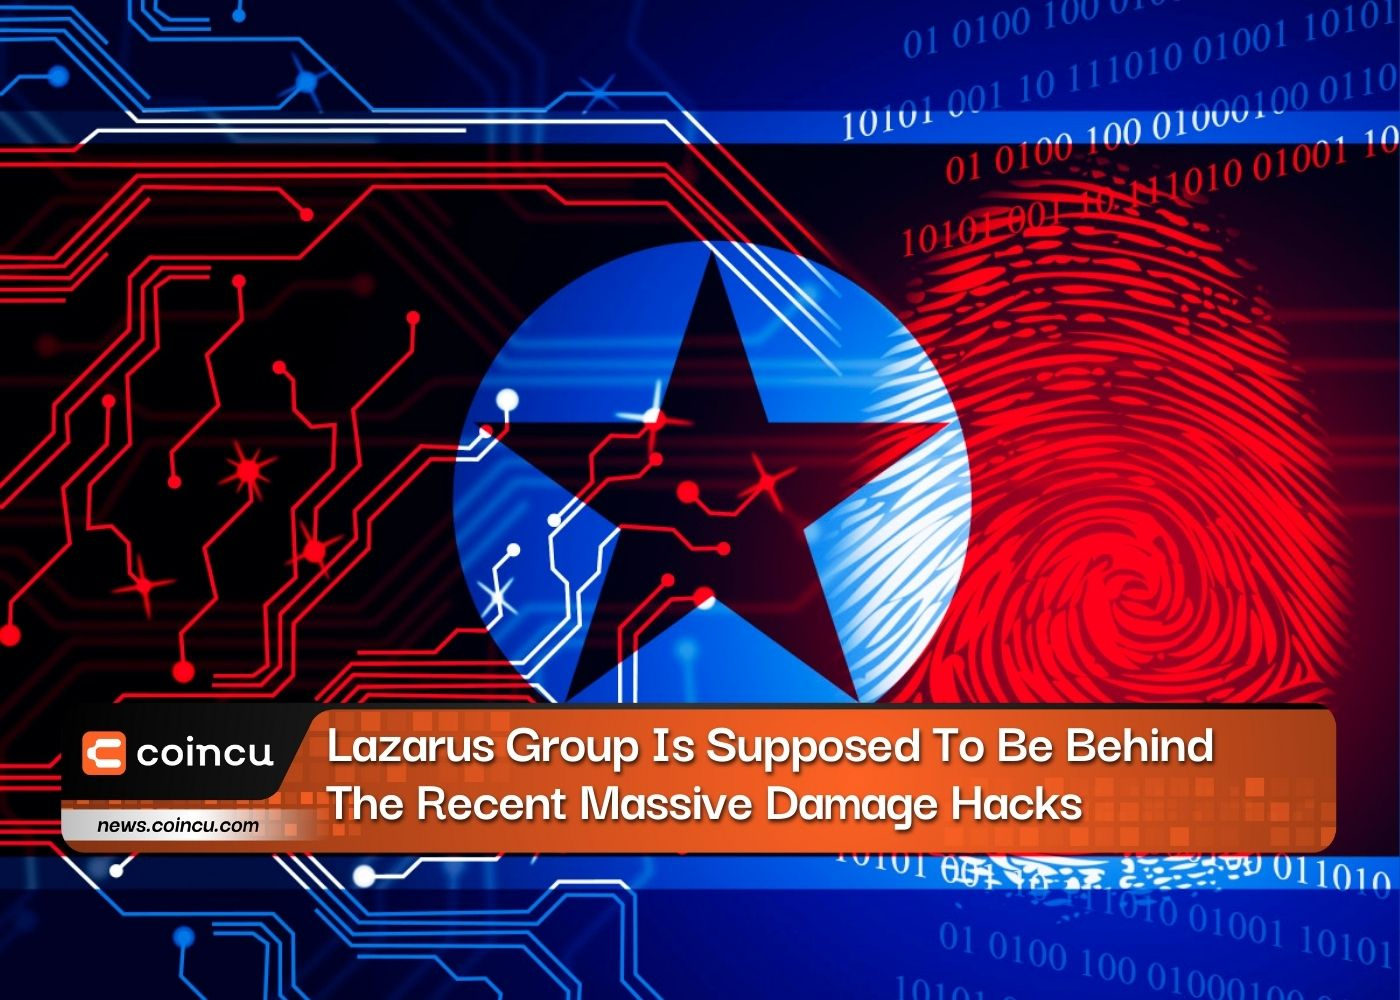 Lazarus Group Is Supposed To Be Behind The Recent Massive Damage Hacks